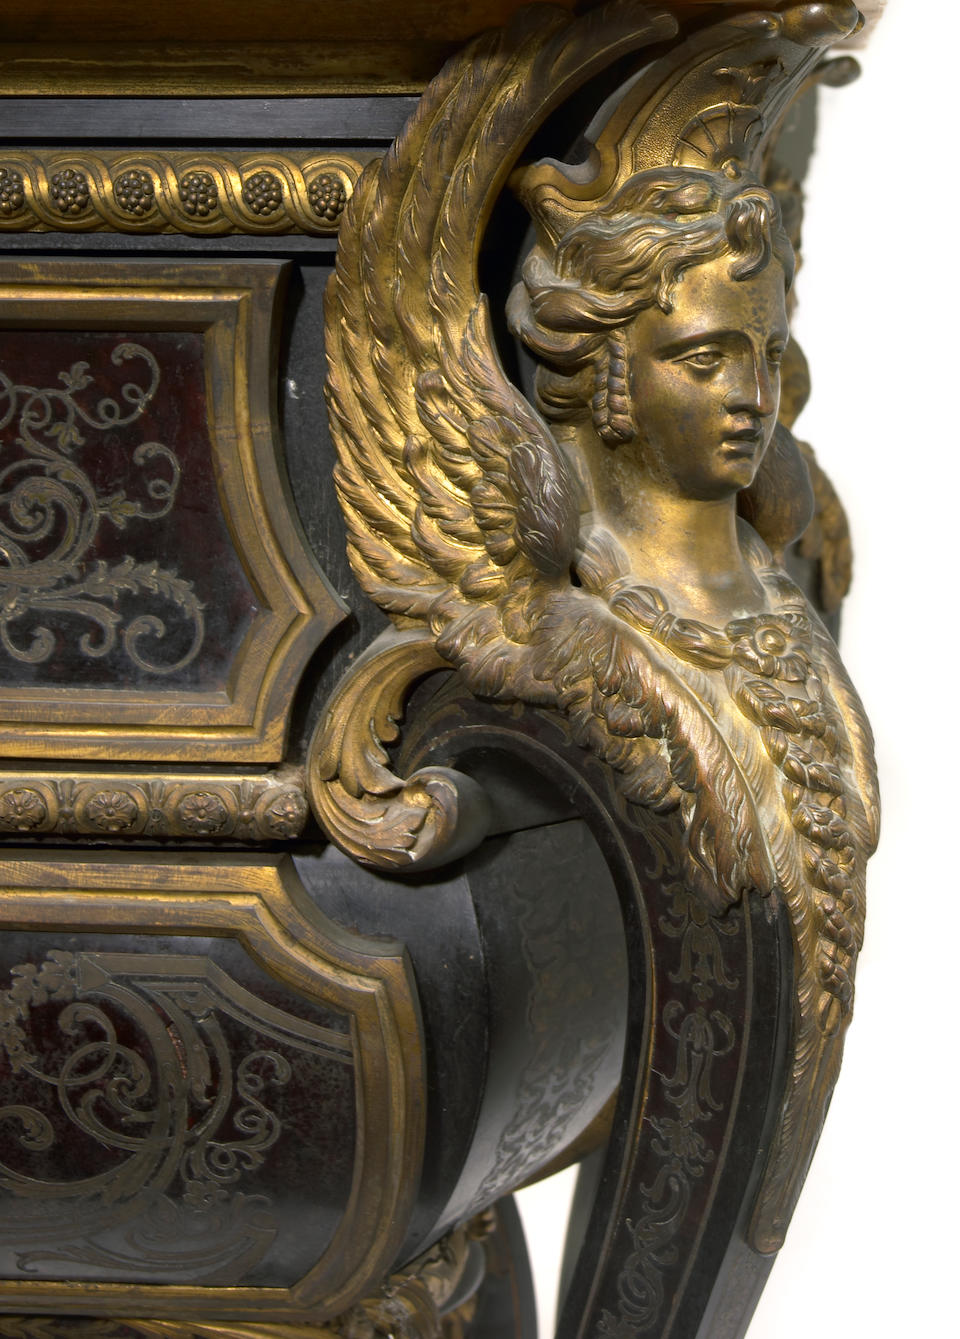 A superb Louis XIV style gilt-bronze mounted cut brass and tortoiseshell ebonized  commode mazarine  Joseph-Emmanuel Zwiener after a model by Andr&#233;-Charles Boulle (1642-1732) fourth quarter 19th century